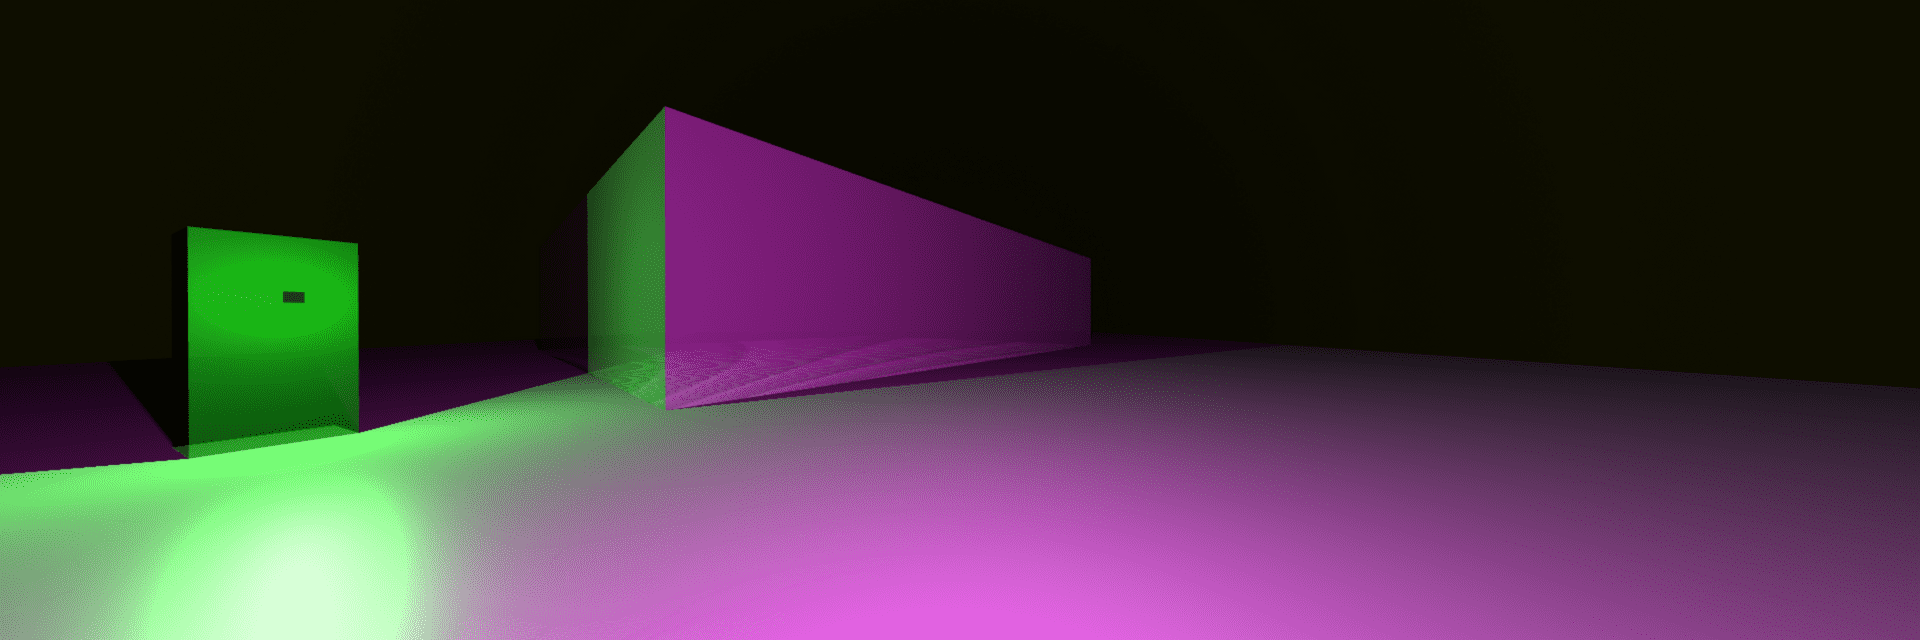 A screenshot of a primitive three dimensional scene lit with pink and green lights